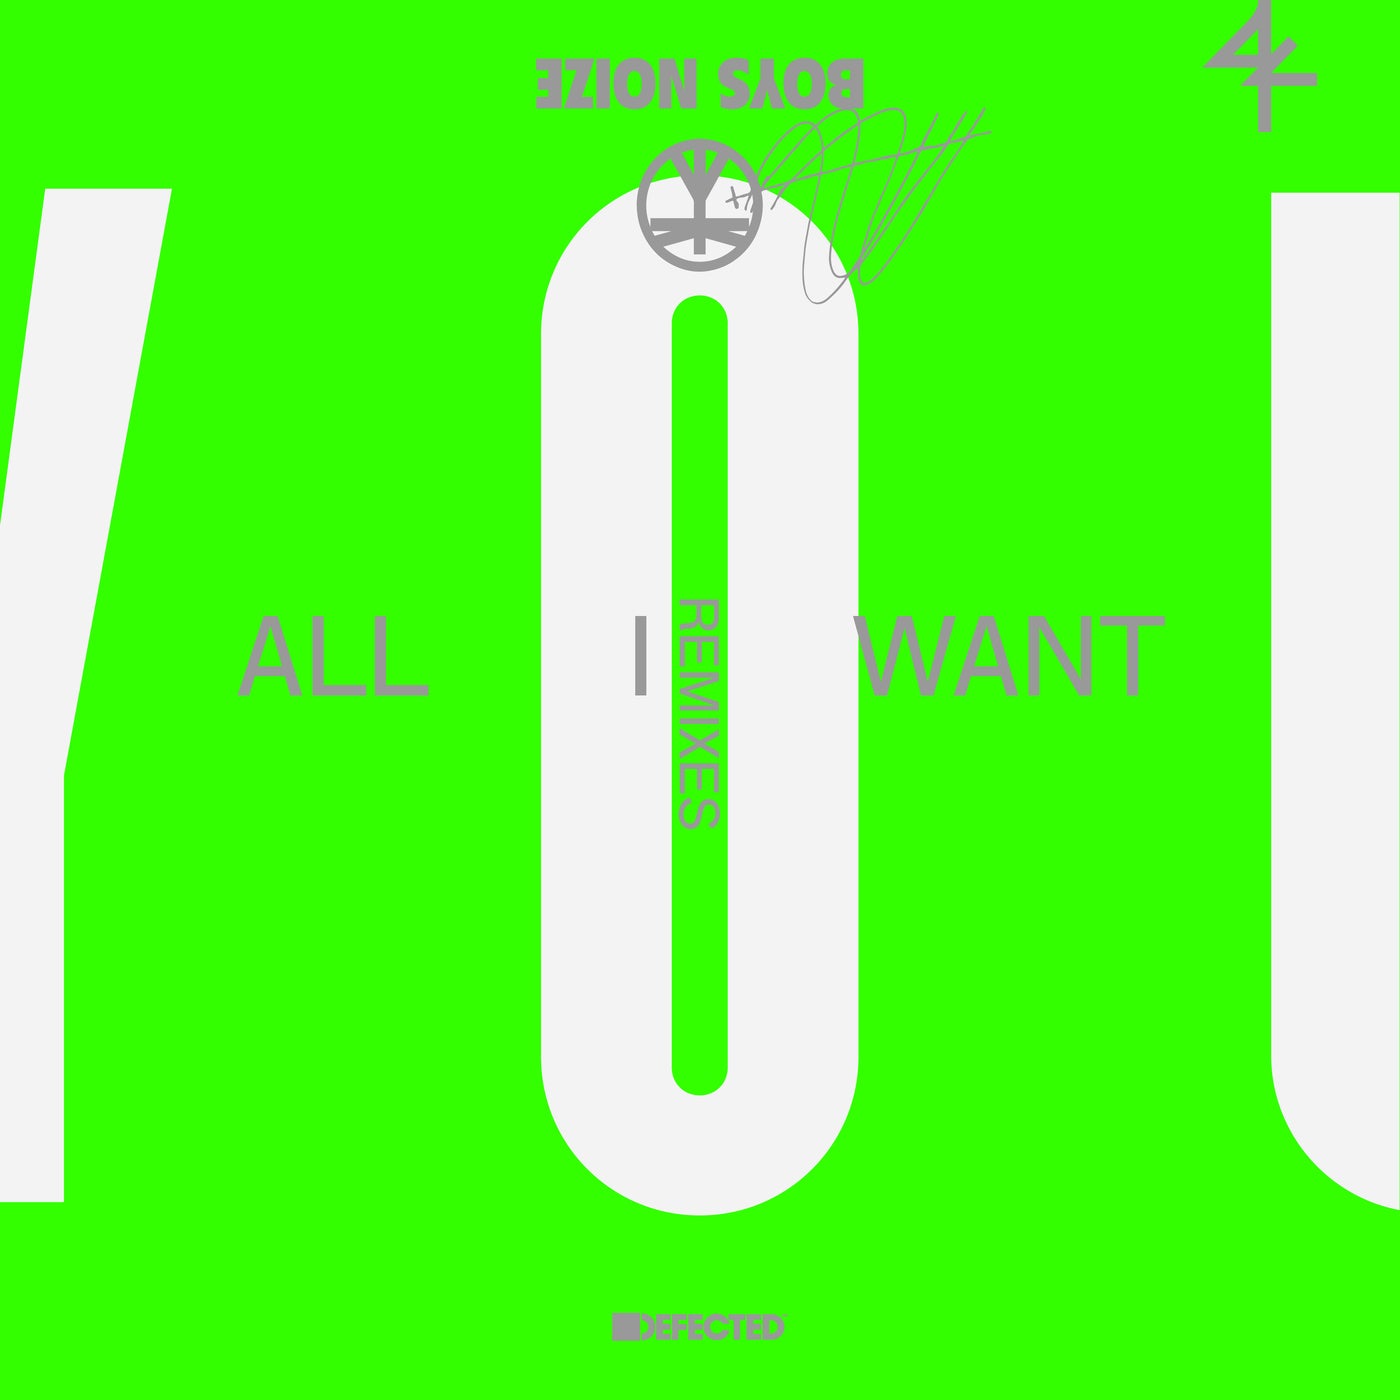 image cover: Boys Noize, Jake Shears - All I Want - Remixes / DFTD622D6